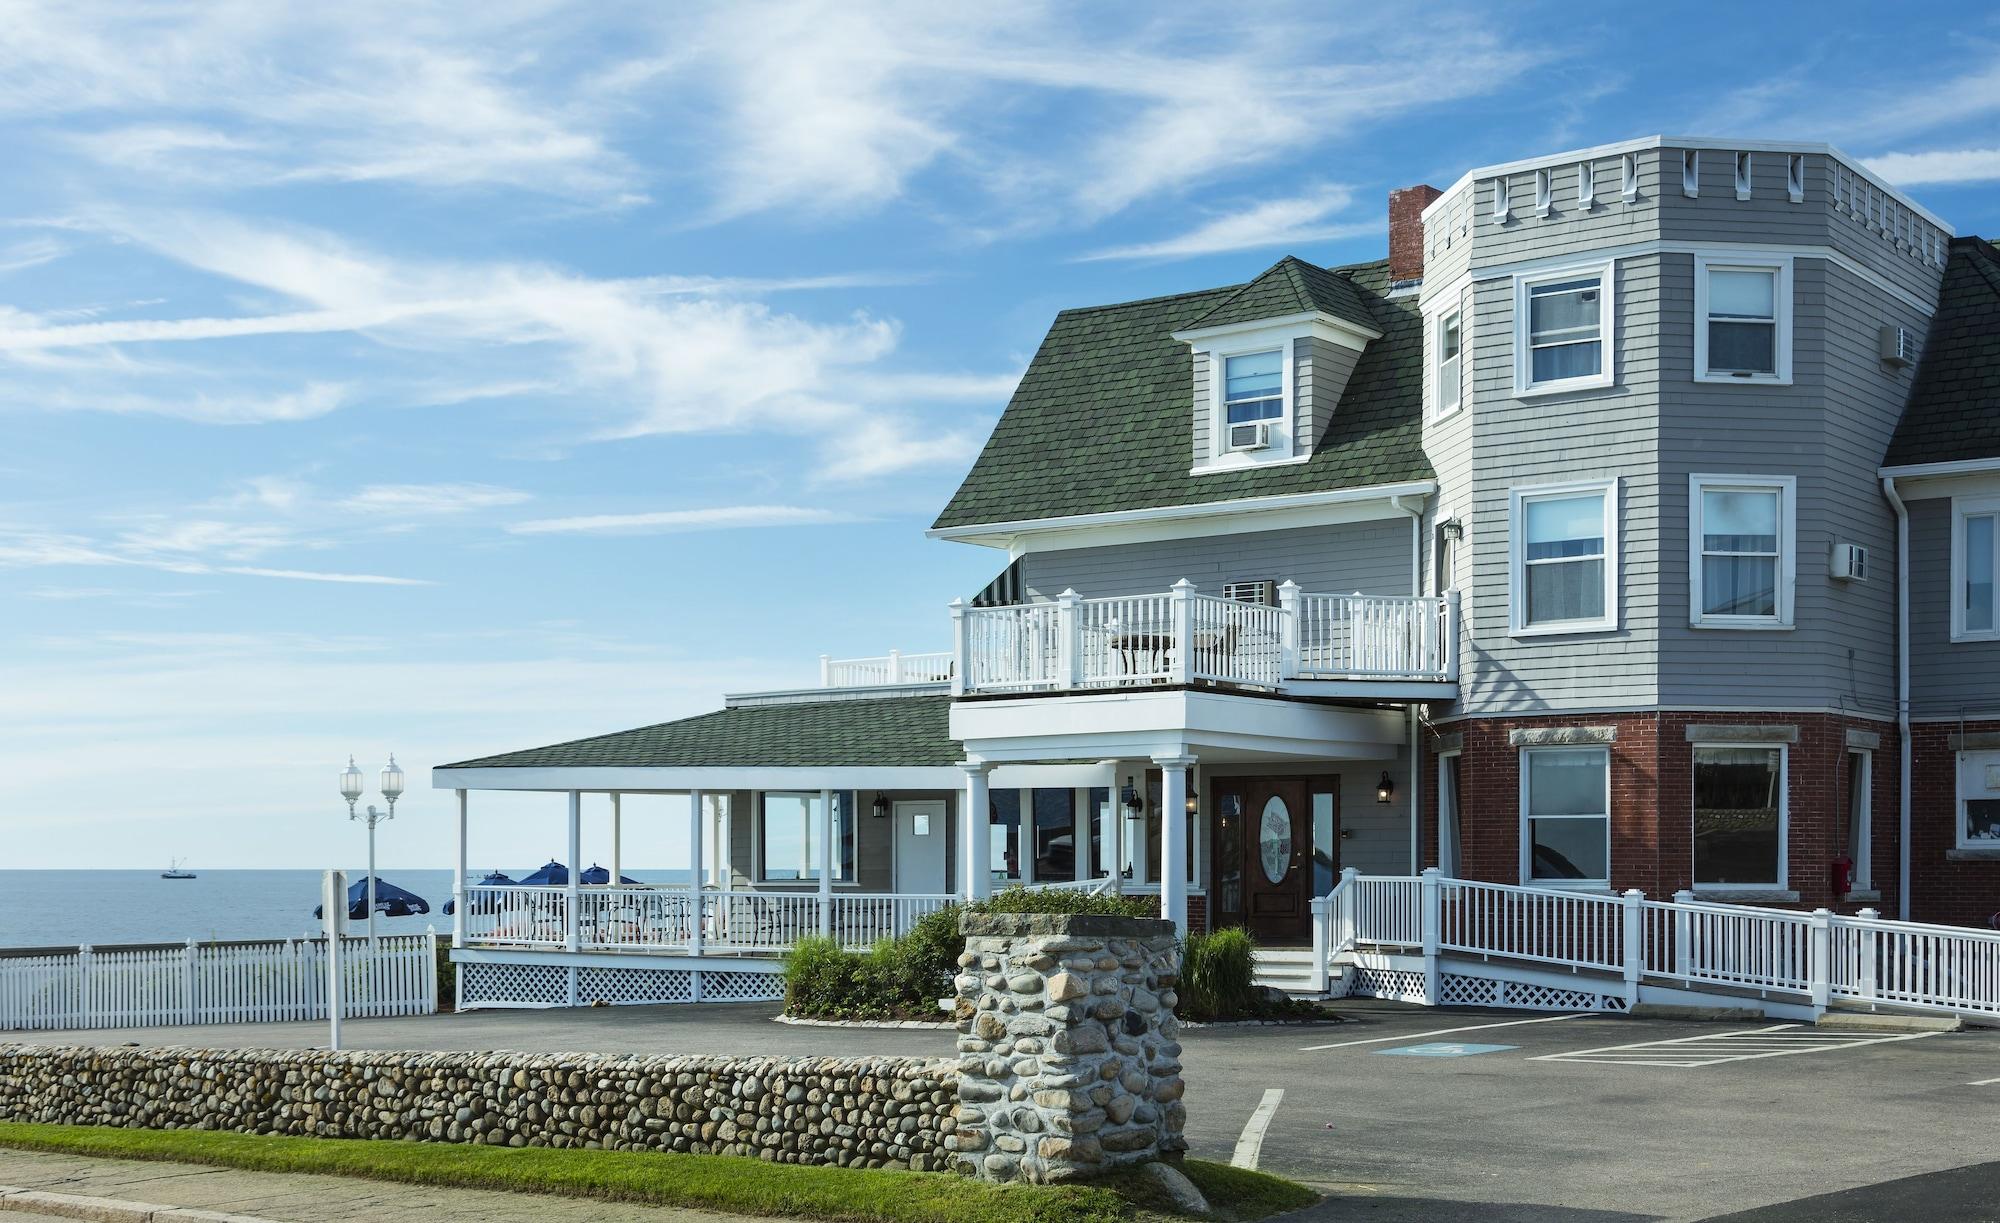 The Shore House image